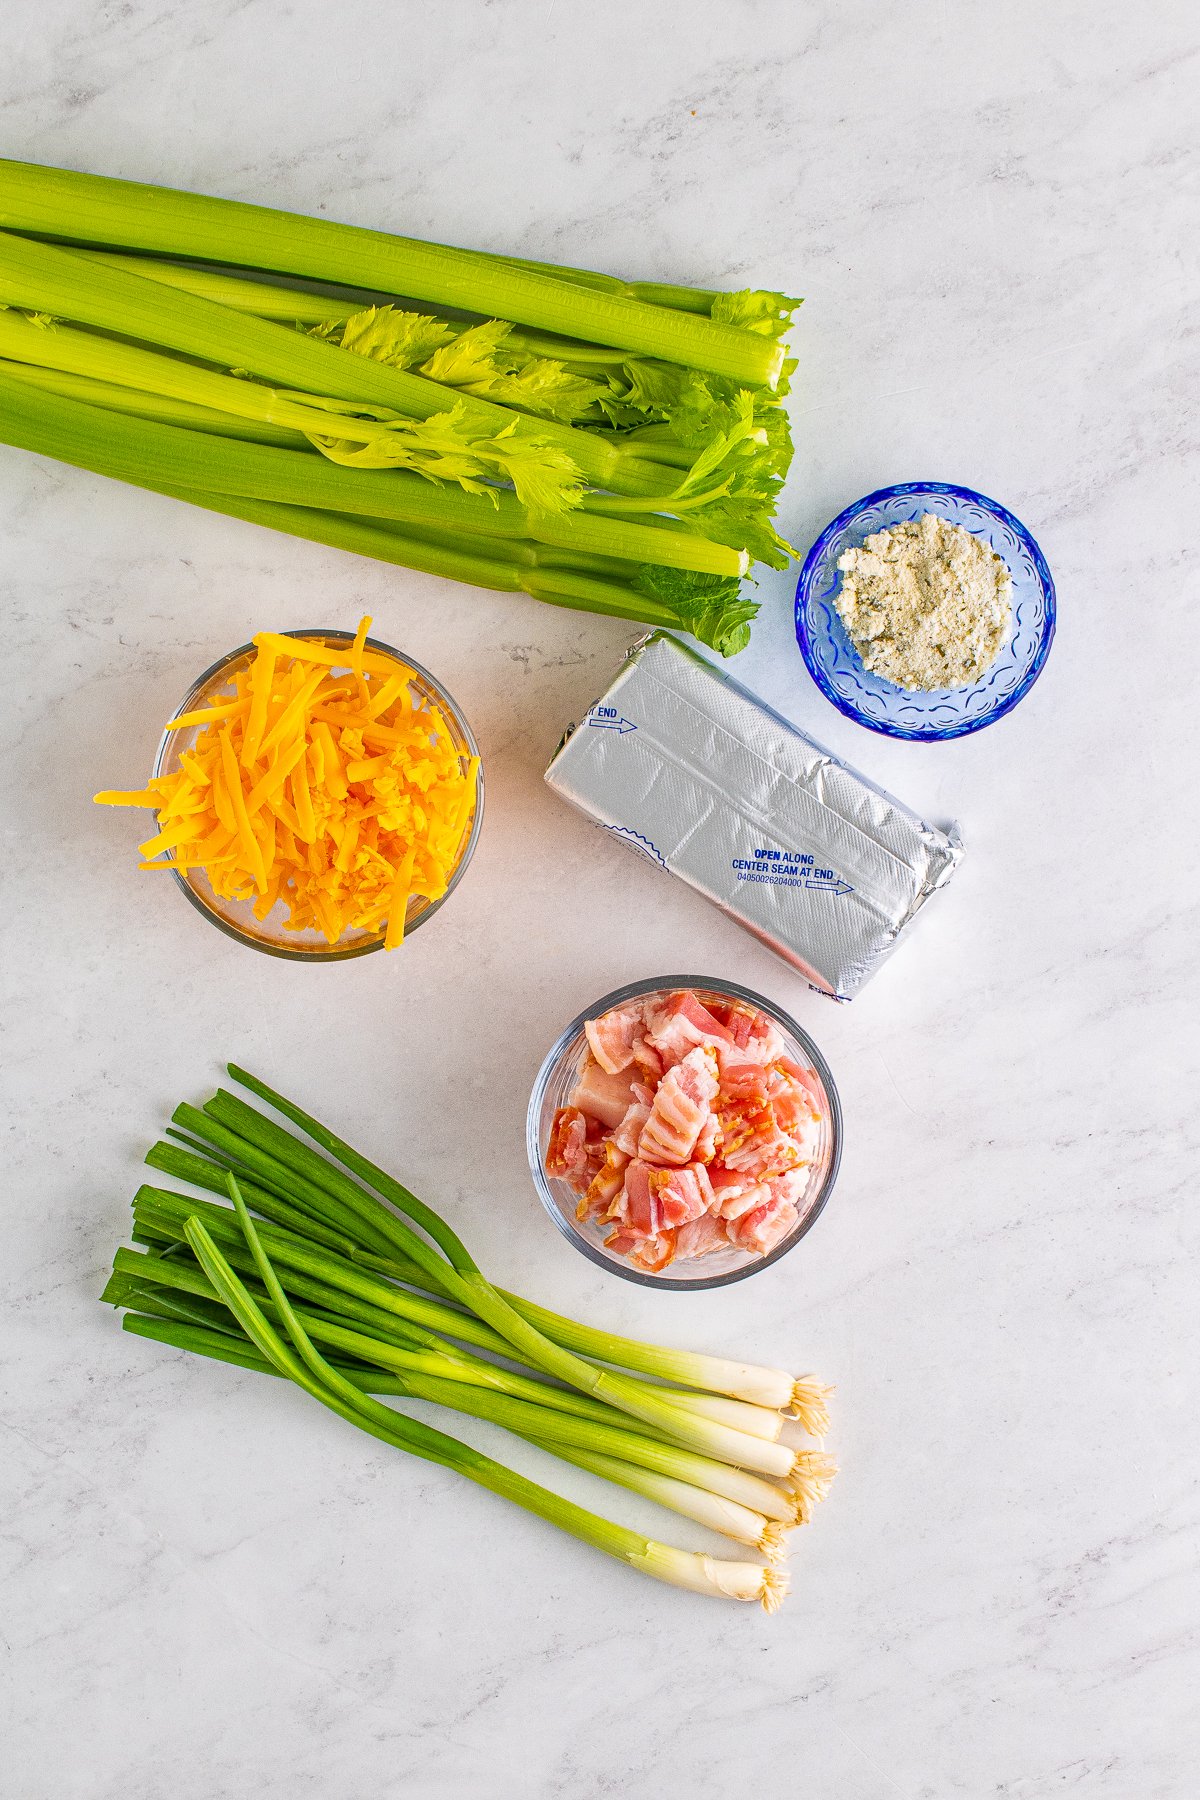 Ingredients needed to make Cheddar Bacon Ranch Stuffed Celery Sticks.